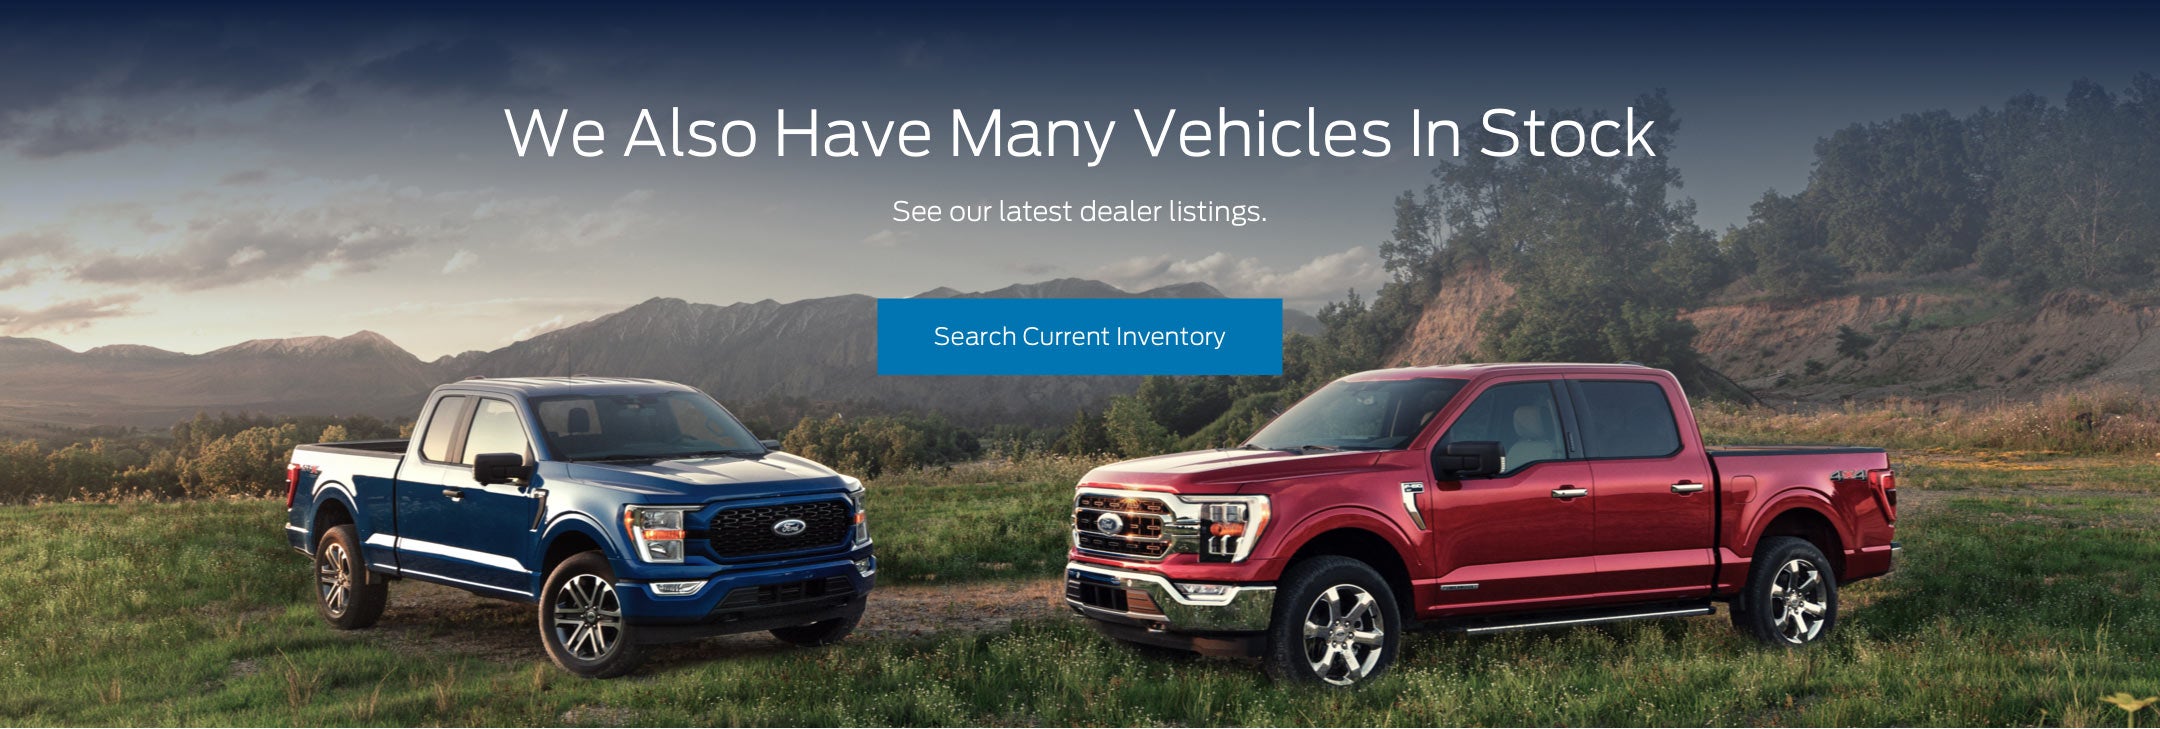 Ford vehicles in stock | Jimmy Granger Ford Natchitoches in Natchitoches LA